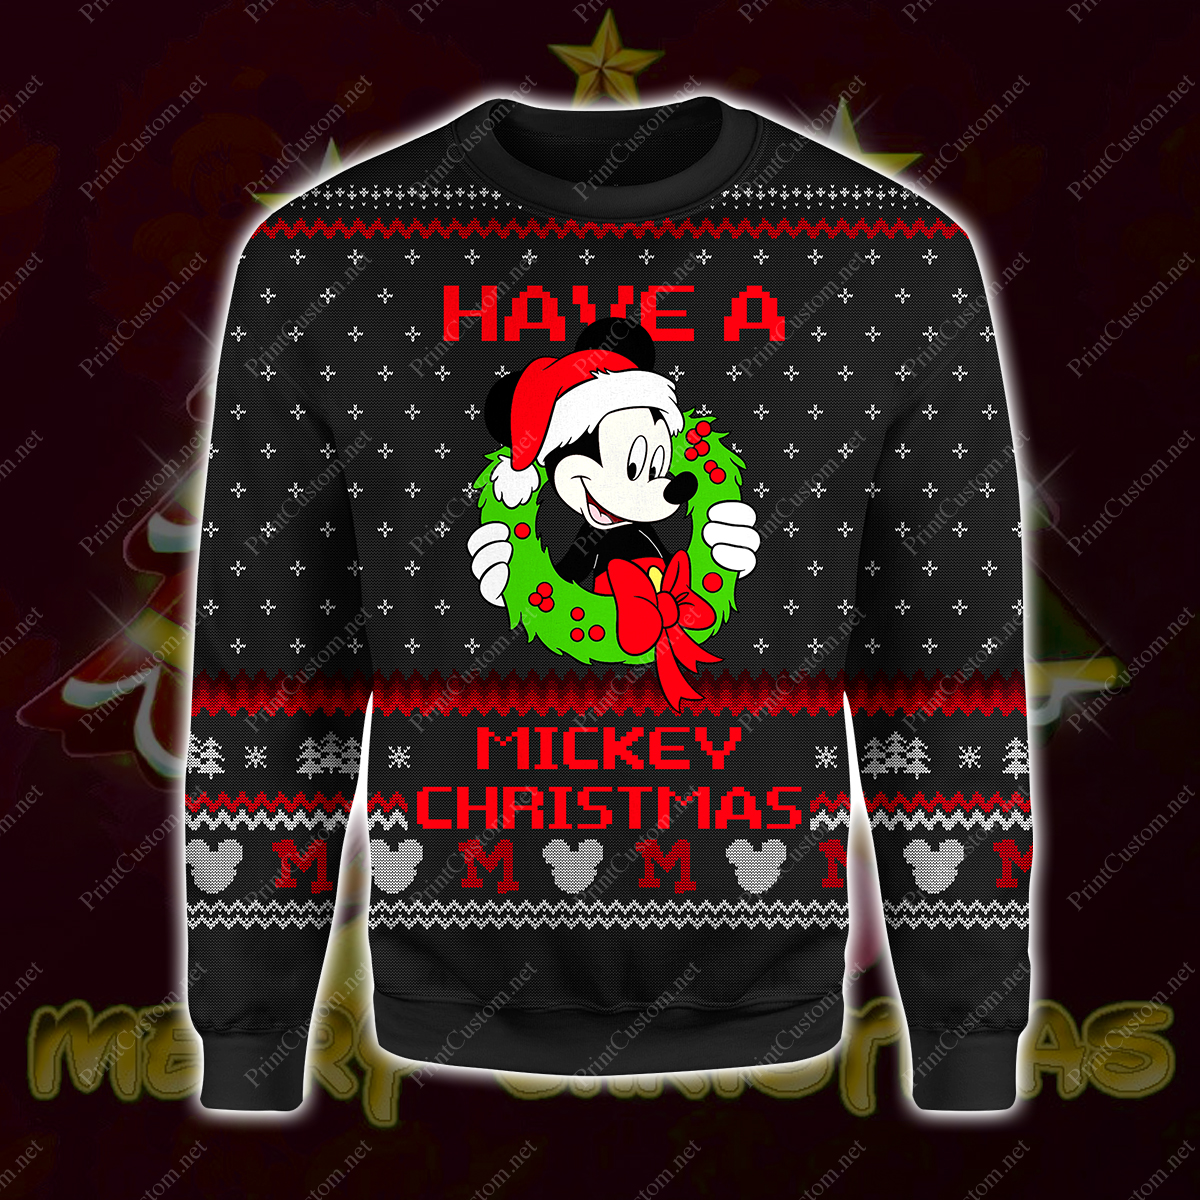 Have a mickey christmas full printing ugly christmas sweater 1